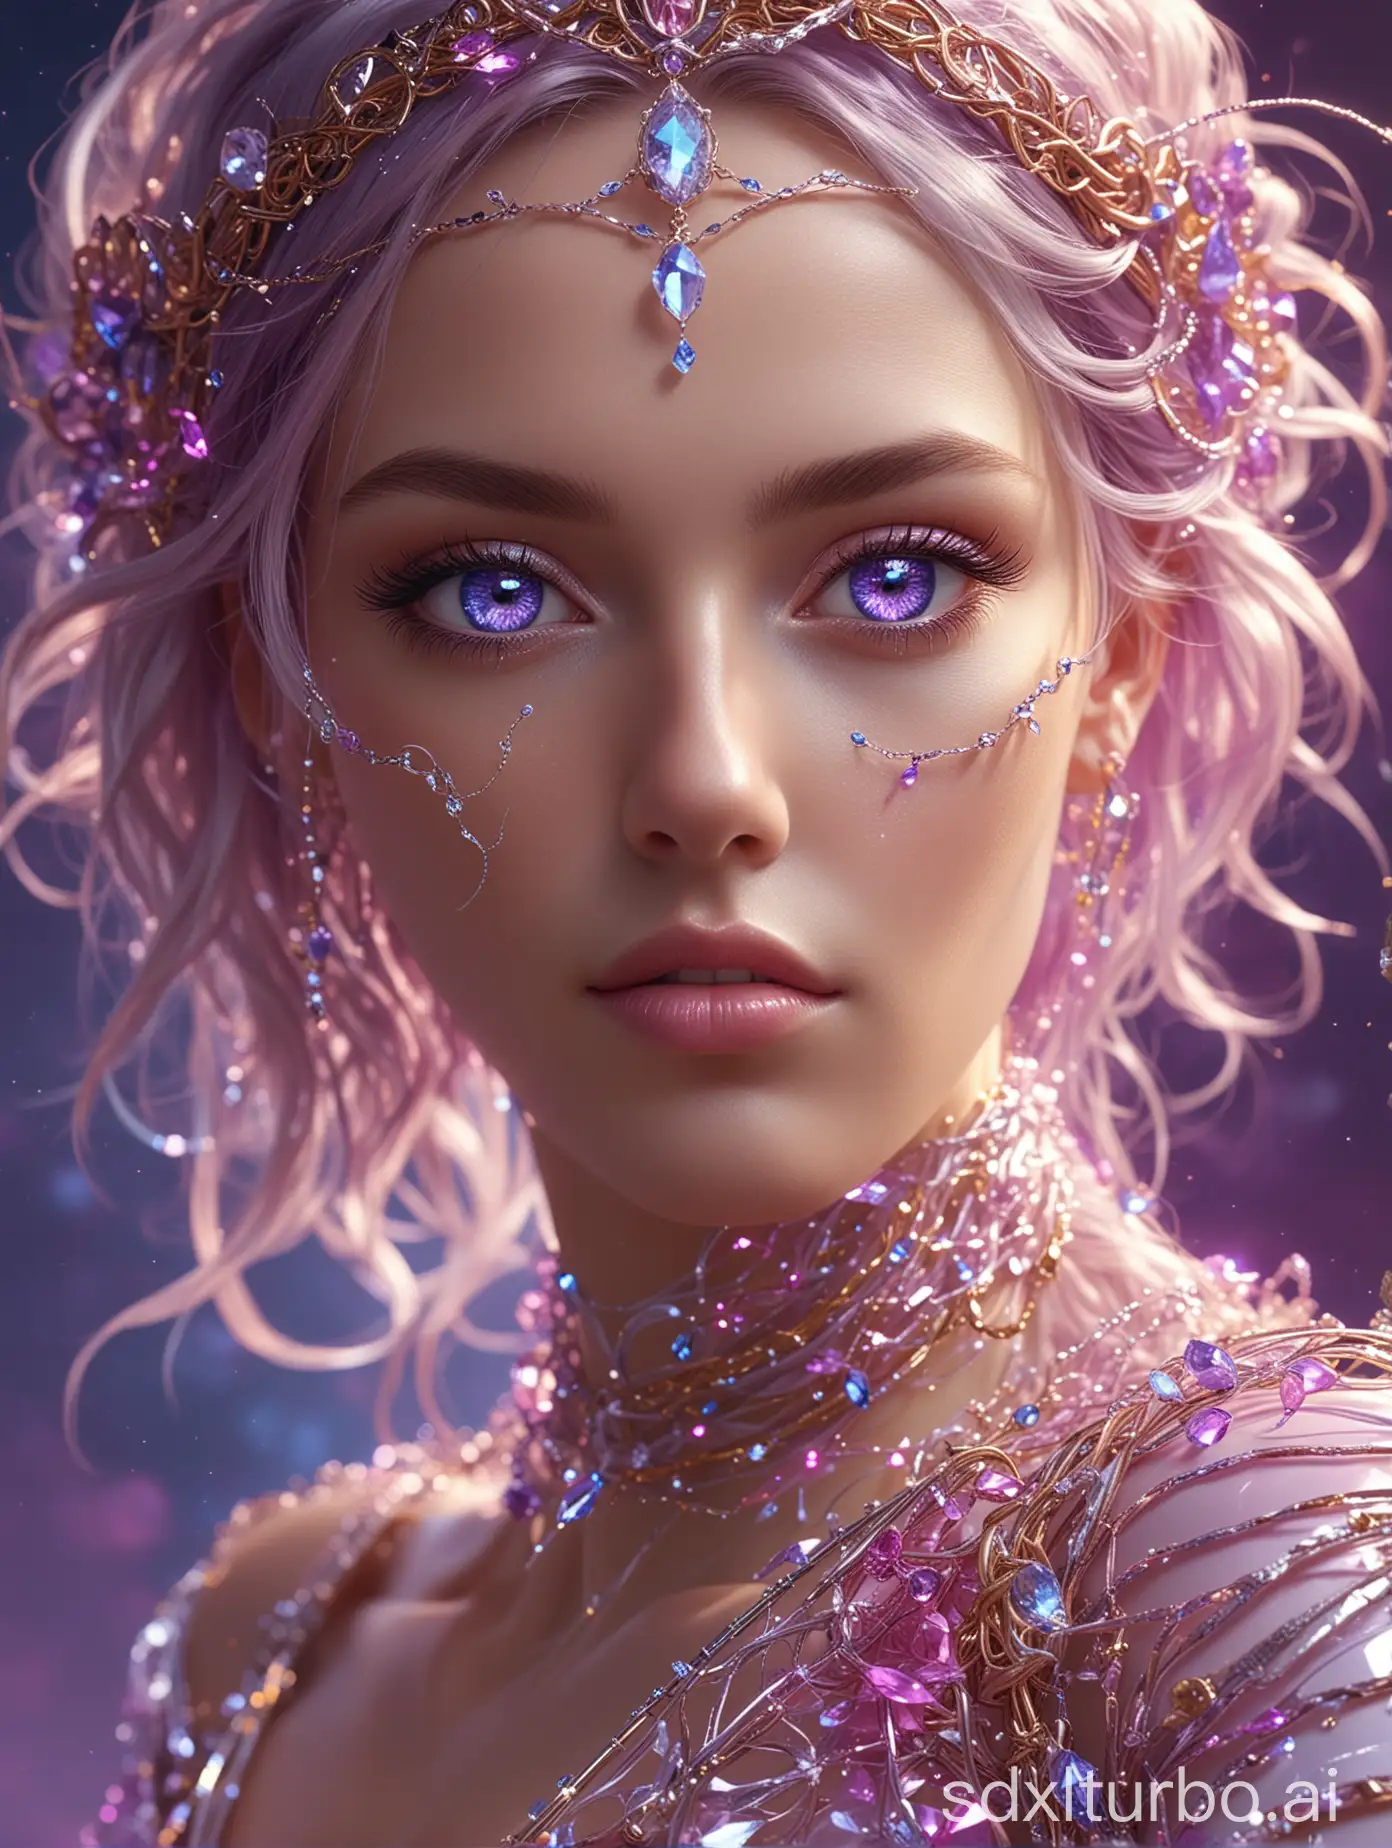 (venus,goddess),(pink and white entanglement),Masterpiece, beautiful details,  uniform 8K wallpaper, high resolution,perfect light,glowing eye,(purple and golden entanglement), (crystal and silver entanglement),Crystal Blue